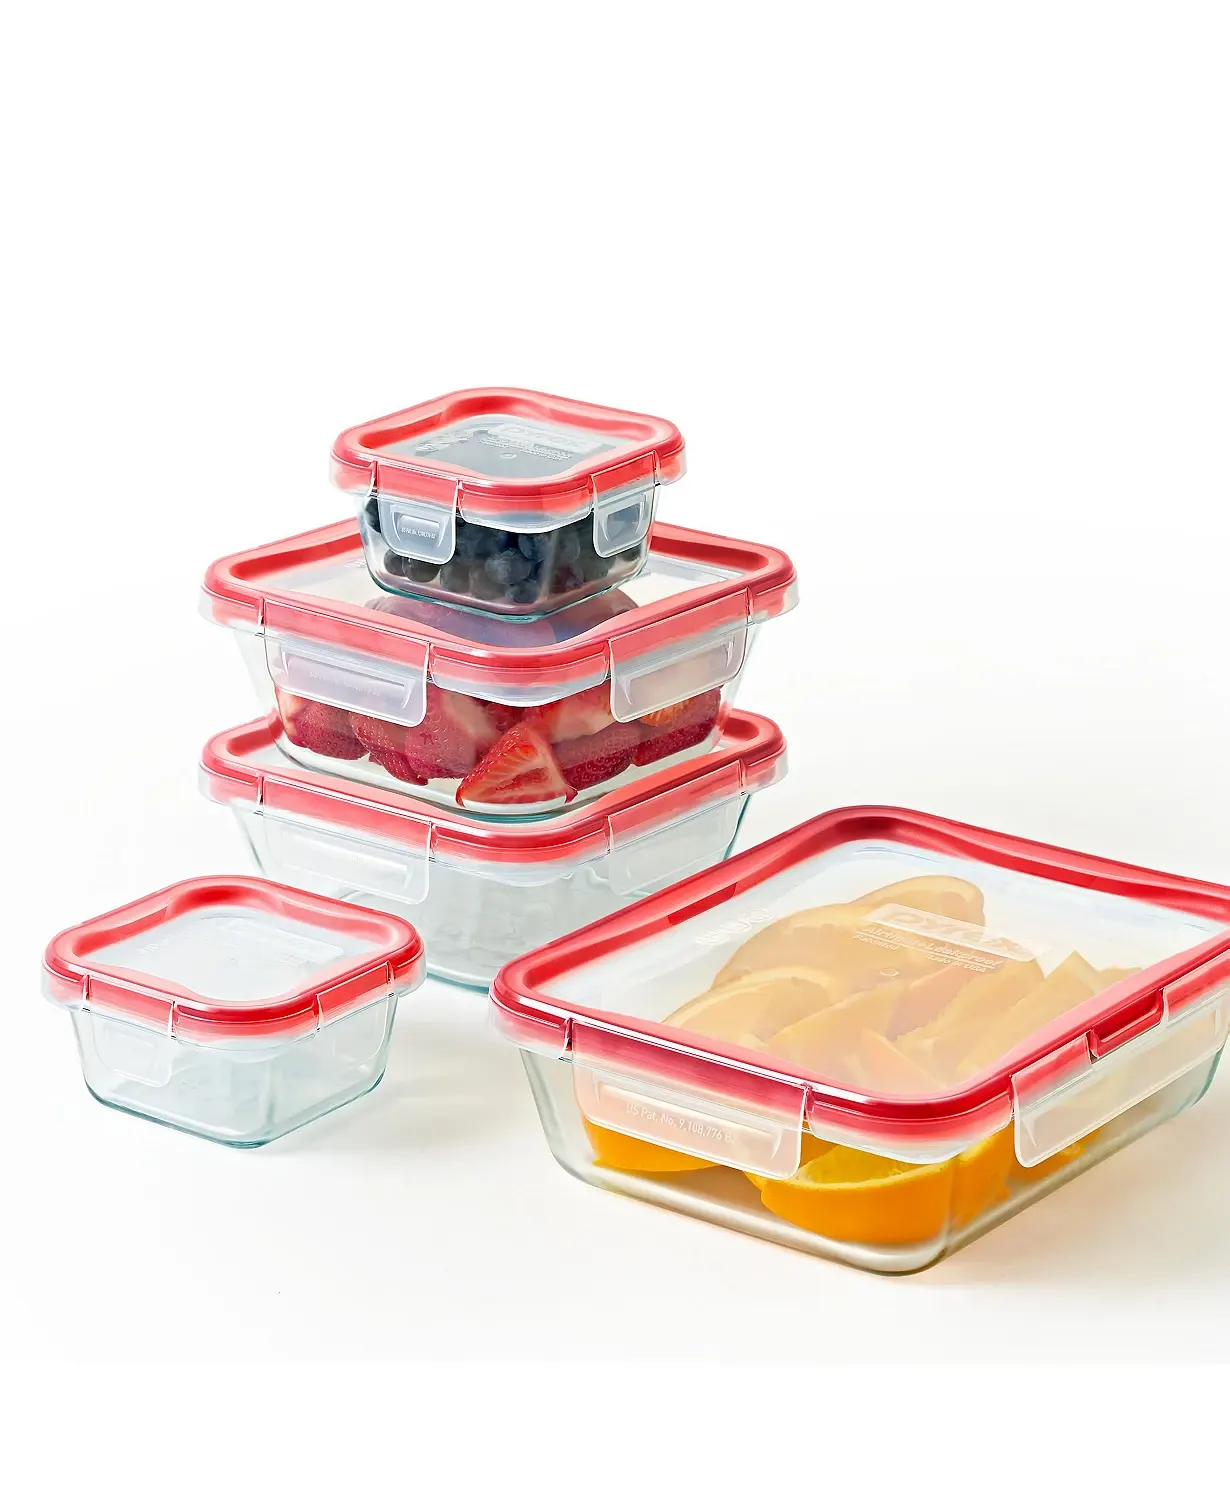 Pyrex Freshlock 14-Piece Mixed Size Glass Food Storage Meal Prep Container  Set, Airtight & Leakproof